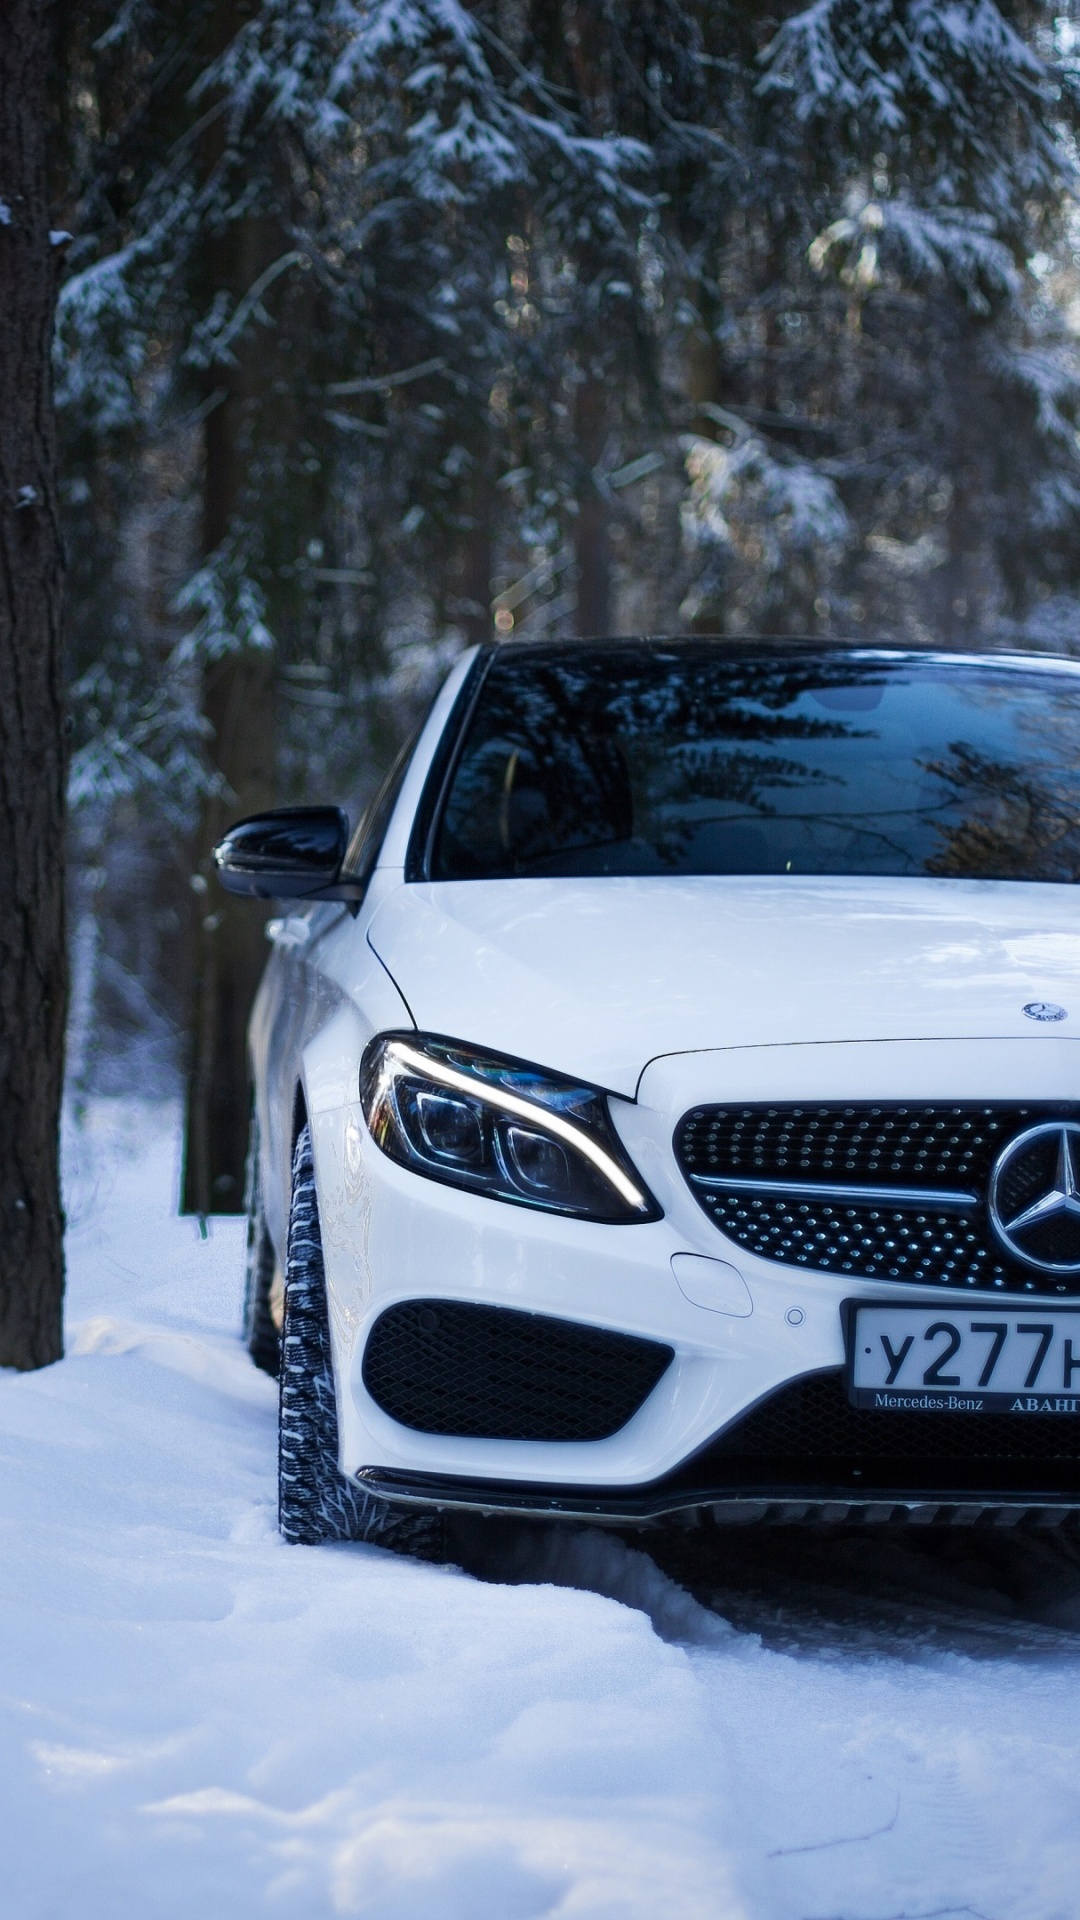 White Mercedes Benz Car on Snow Covered Ground. Wallpaper in 1080x1920 Resolution